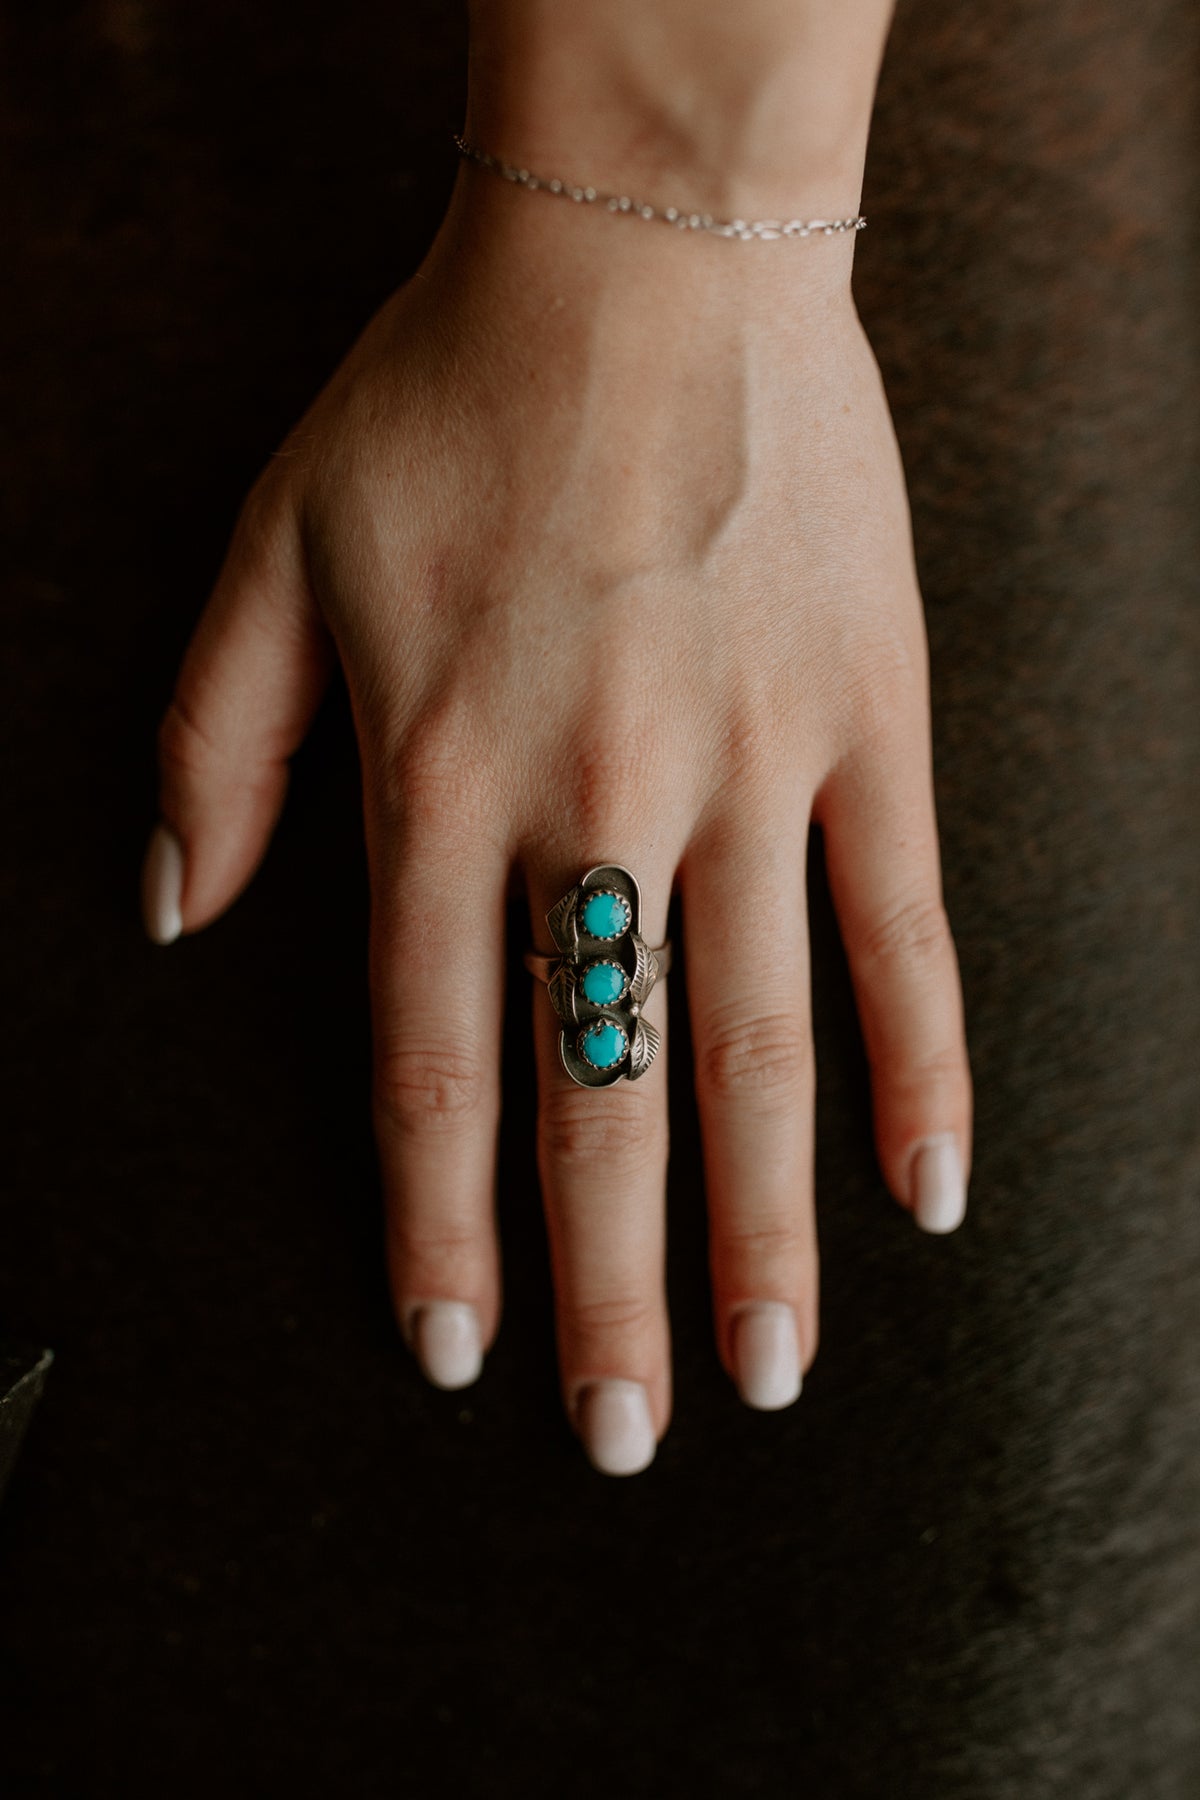 Vintage Turquoise Ring - Size 6.5